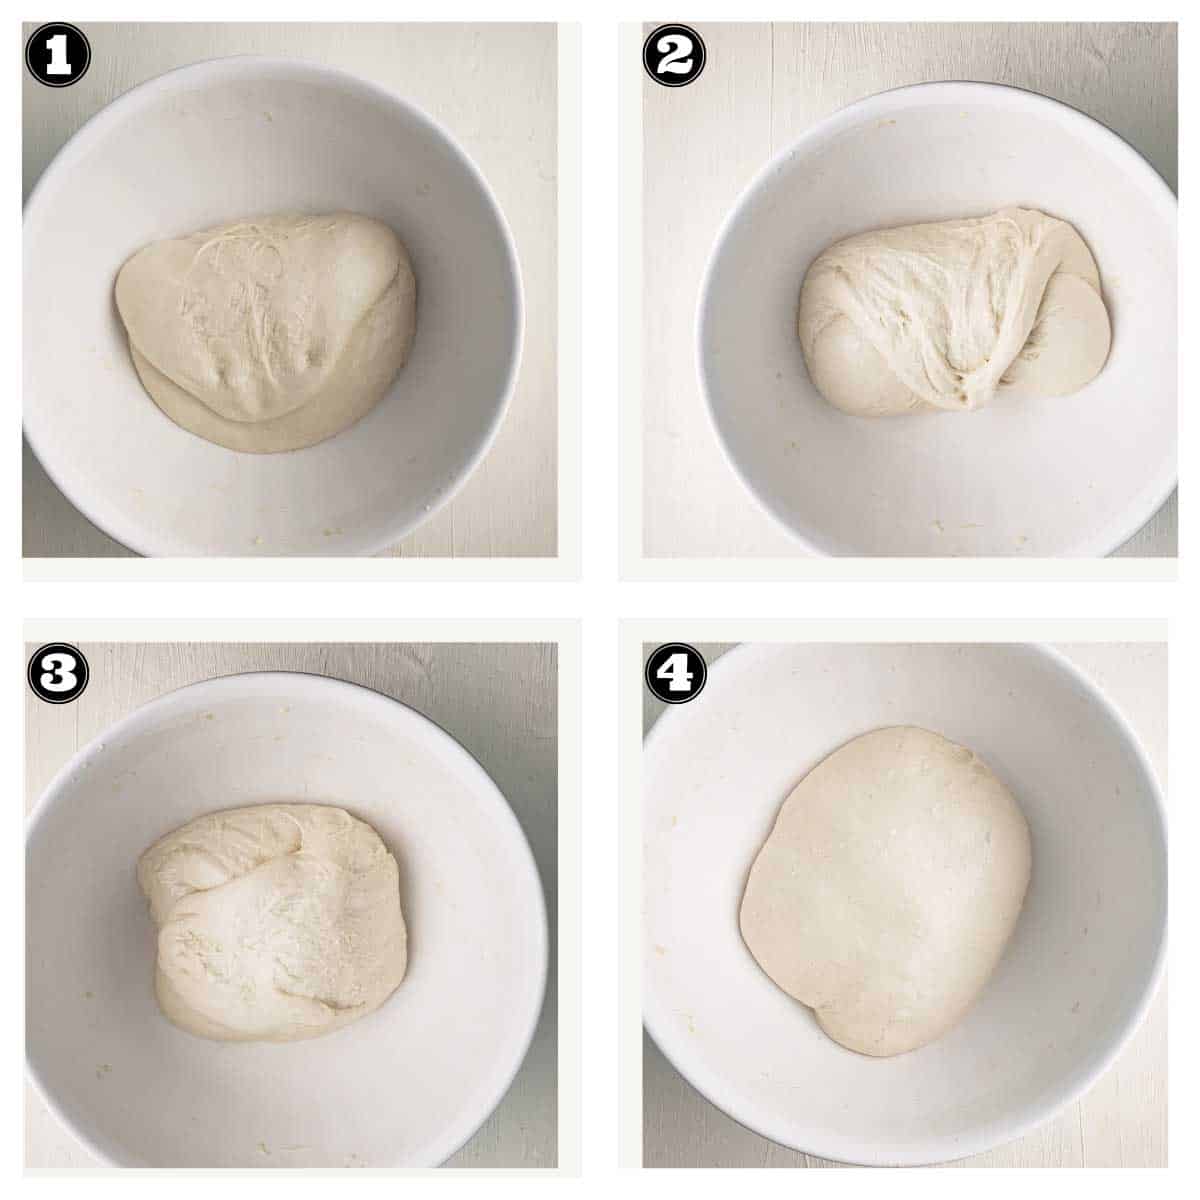 stretching and folding the dough